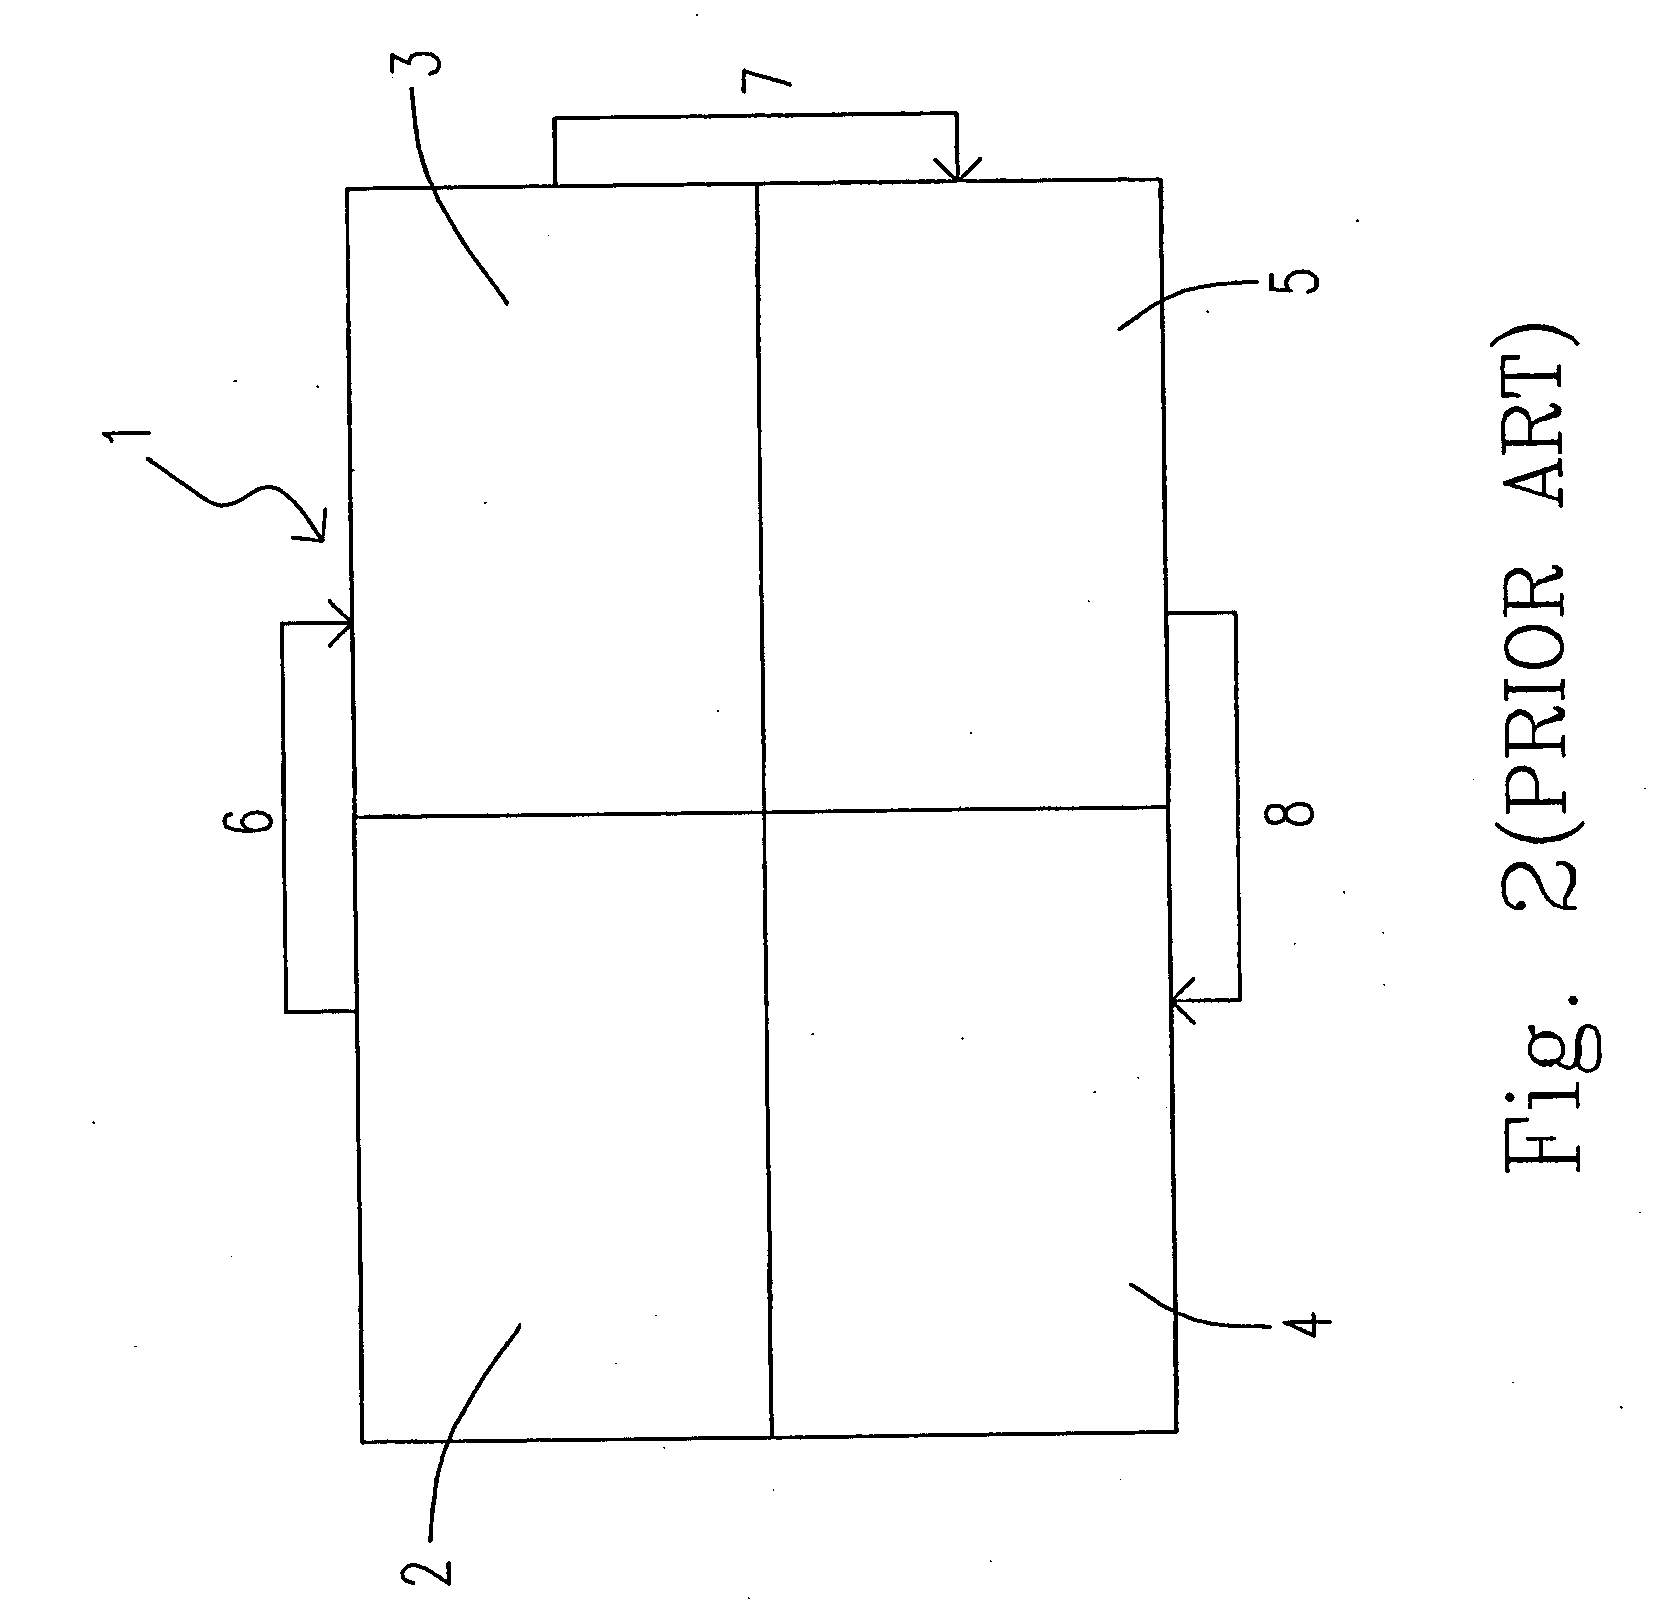 Brightness-adjusting device for video wall system and method therefor